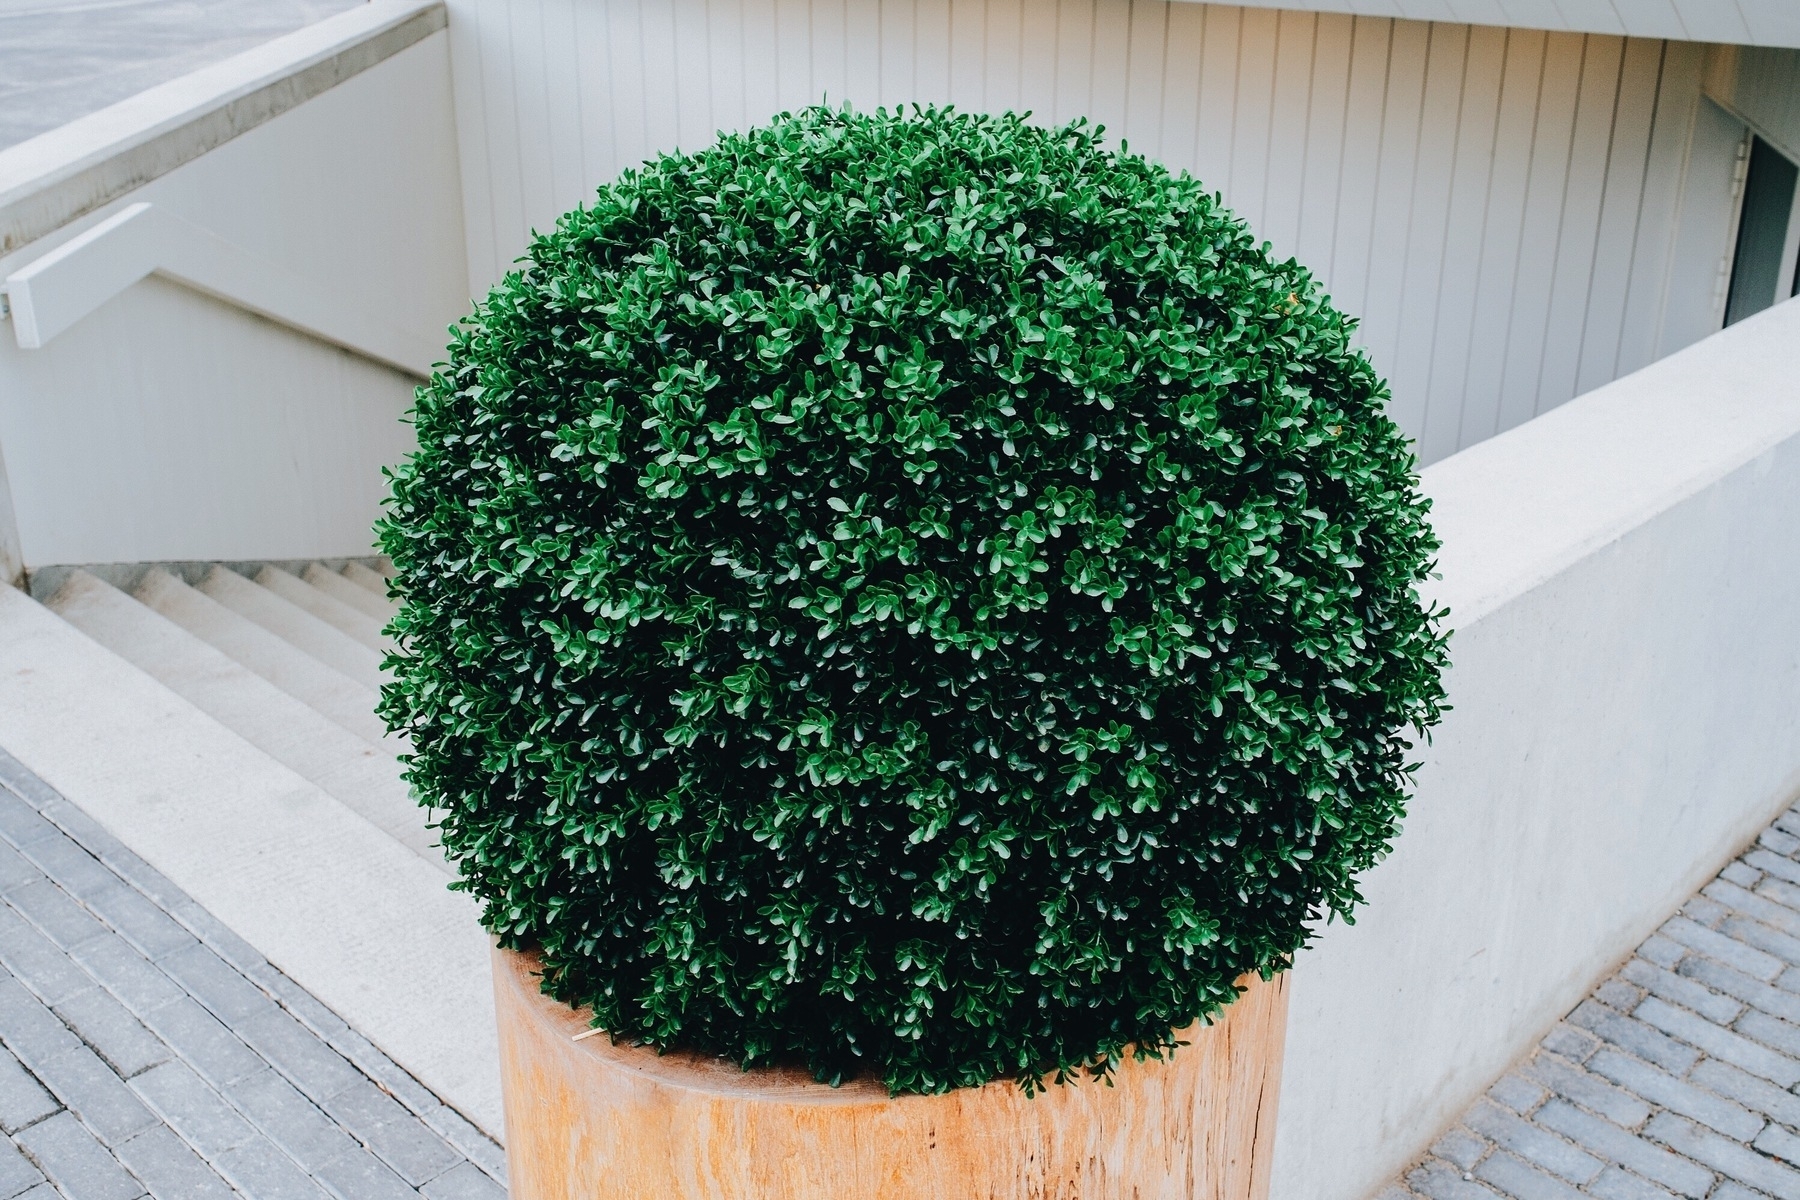 a round green potted plant, stairs in the background.